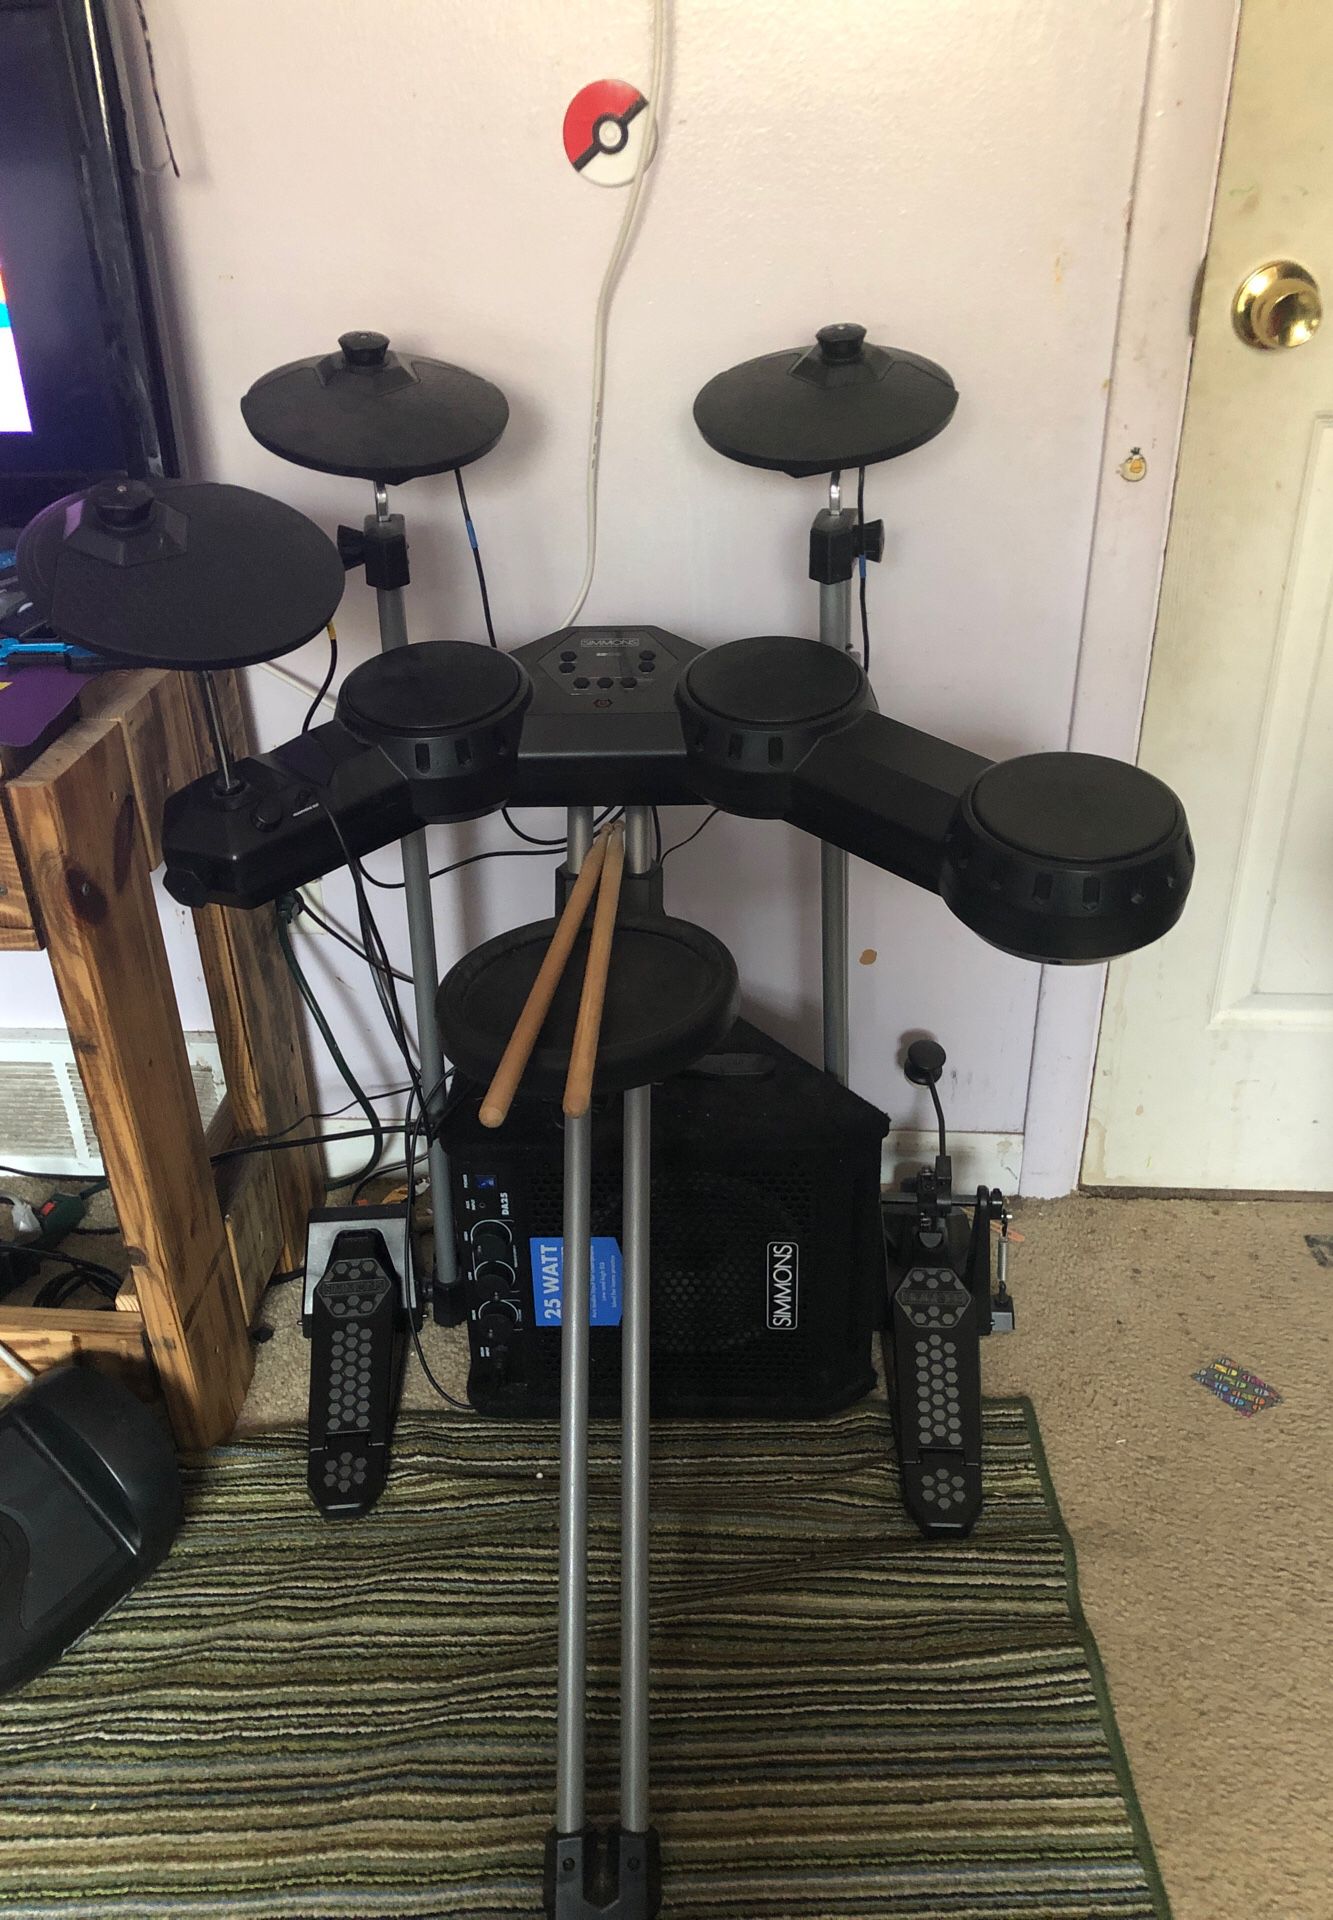 Simmons electronic drum set with simmons 25watt amp